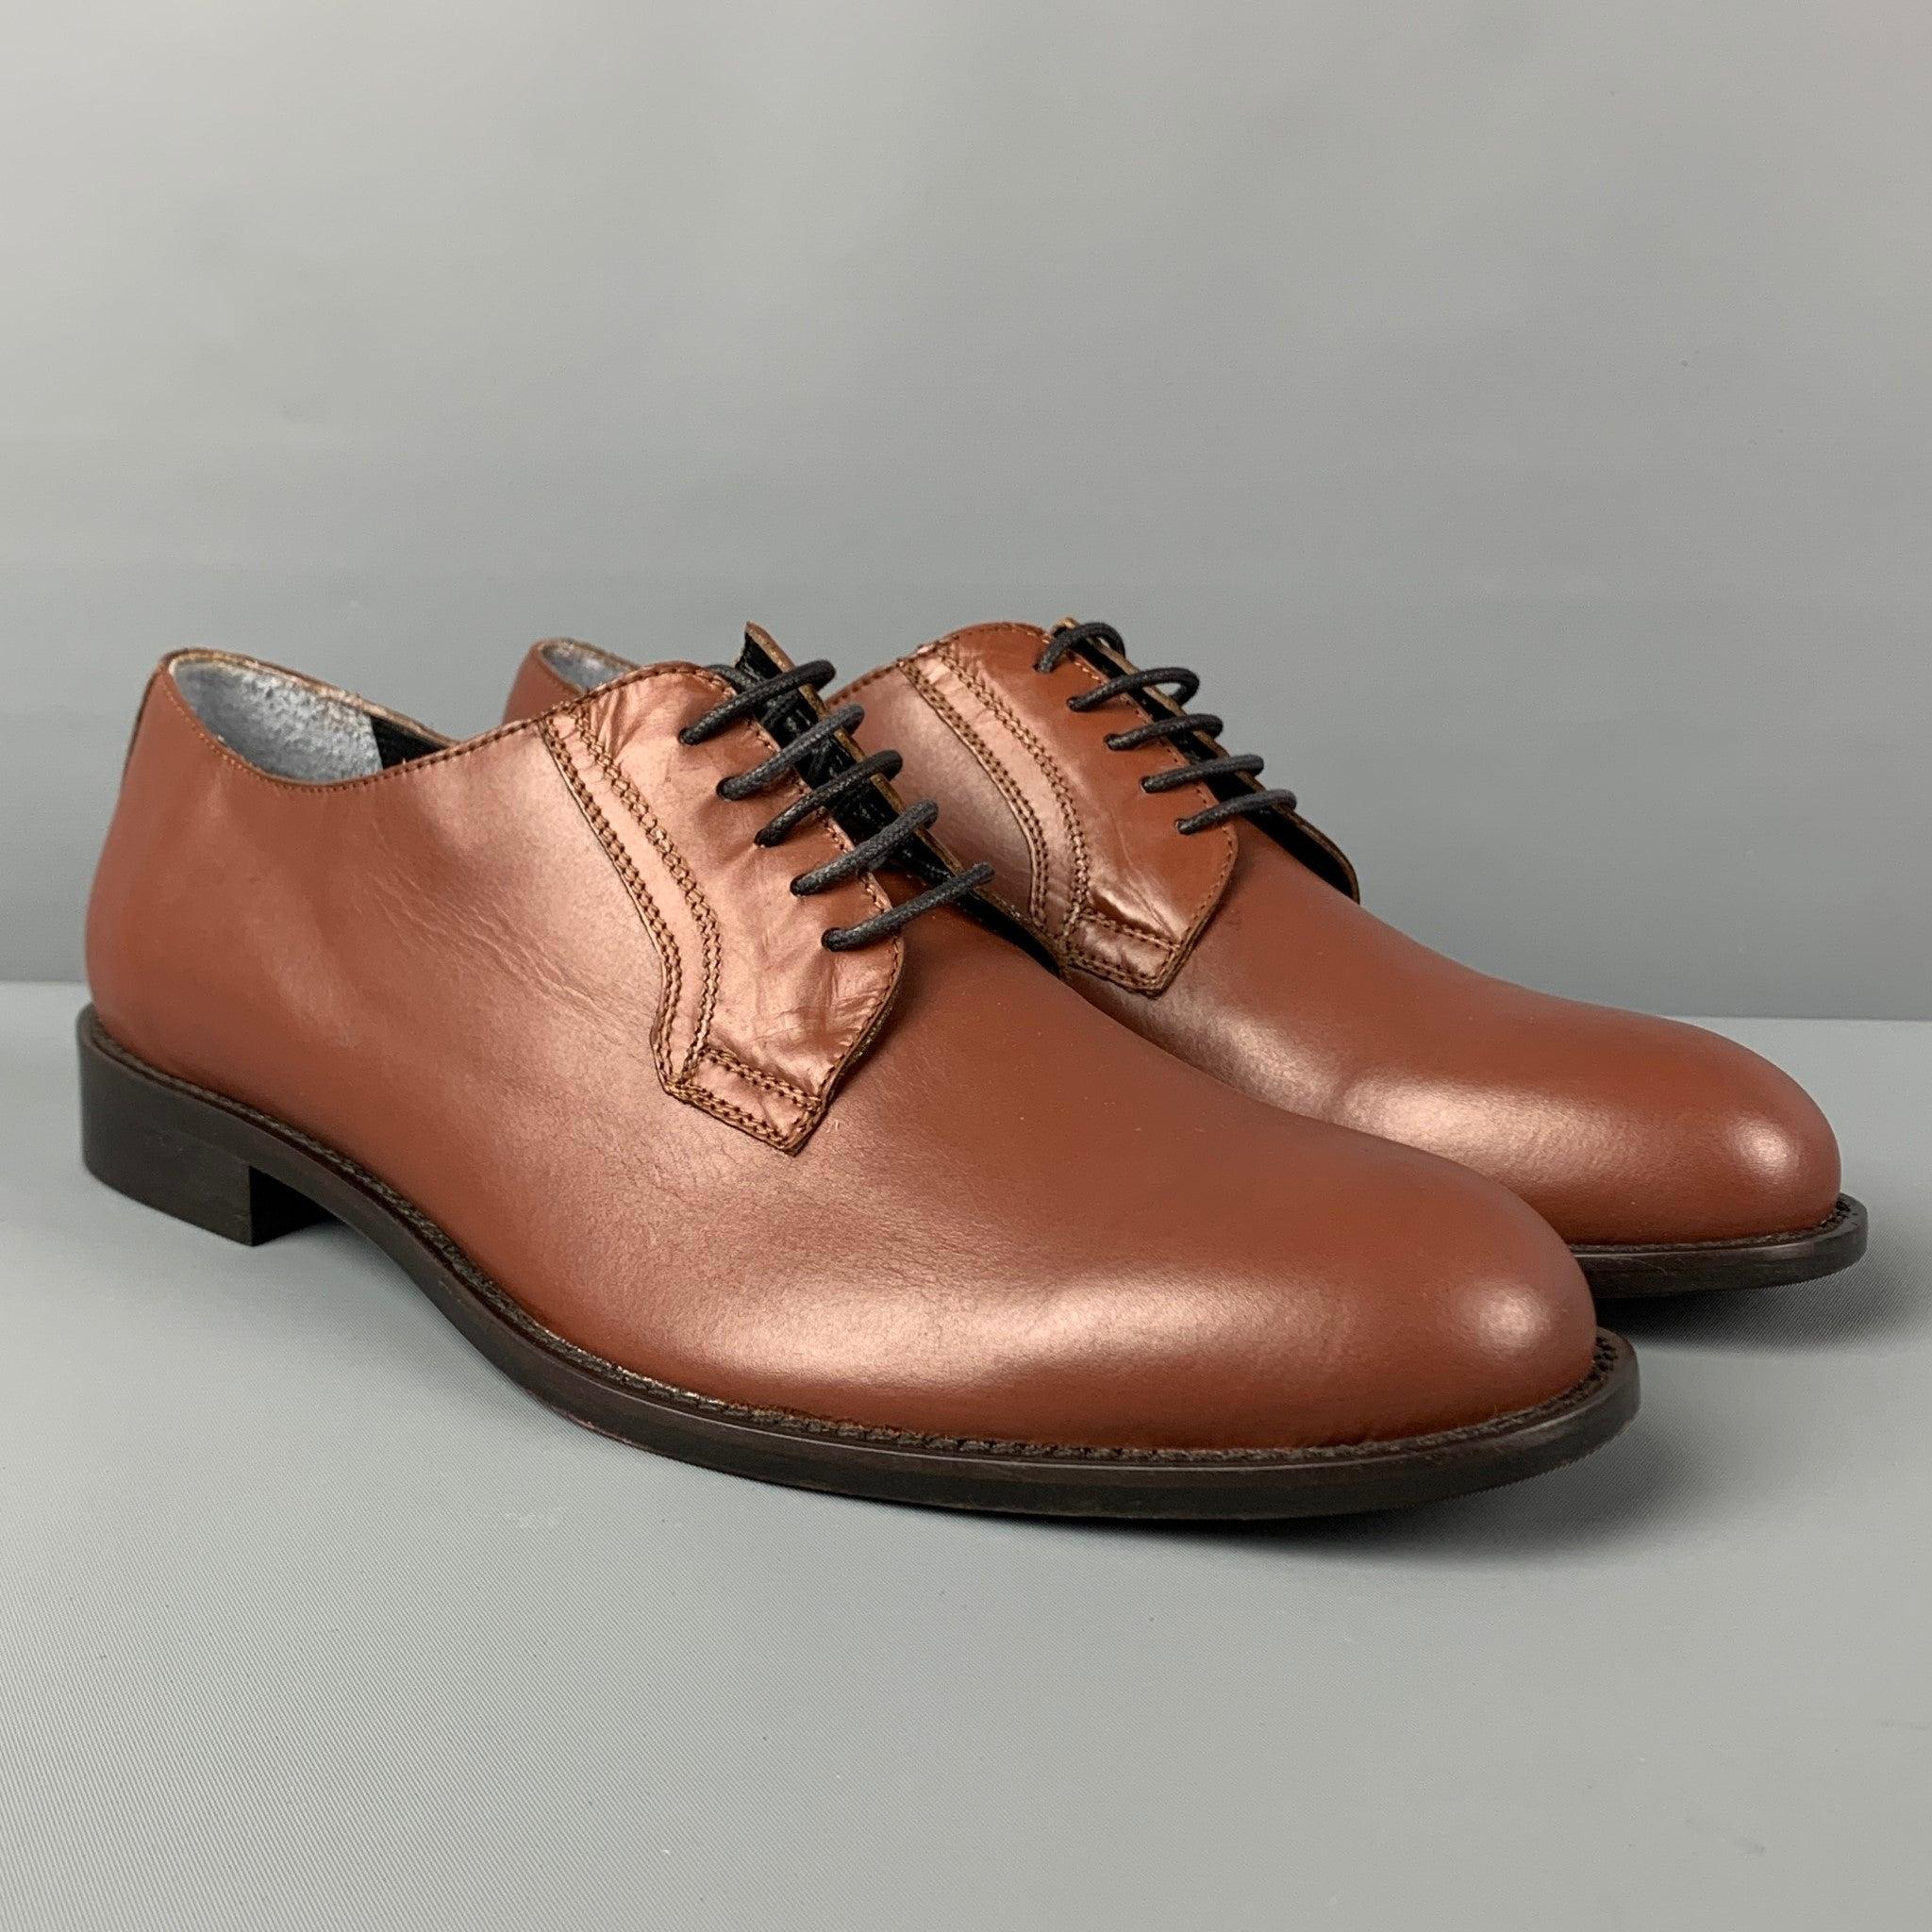 BRUNO MAGLI shoes comes in a brown leather featuring a classic style and a lace up closure. Includes box. Made in Italy.
Very Good
Pre-Owned Condition. 

Marked:   43Outsole: 12 inches  x 4.25 inches 
  
  
 
Reference: 120003
Category: Lace Up